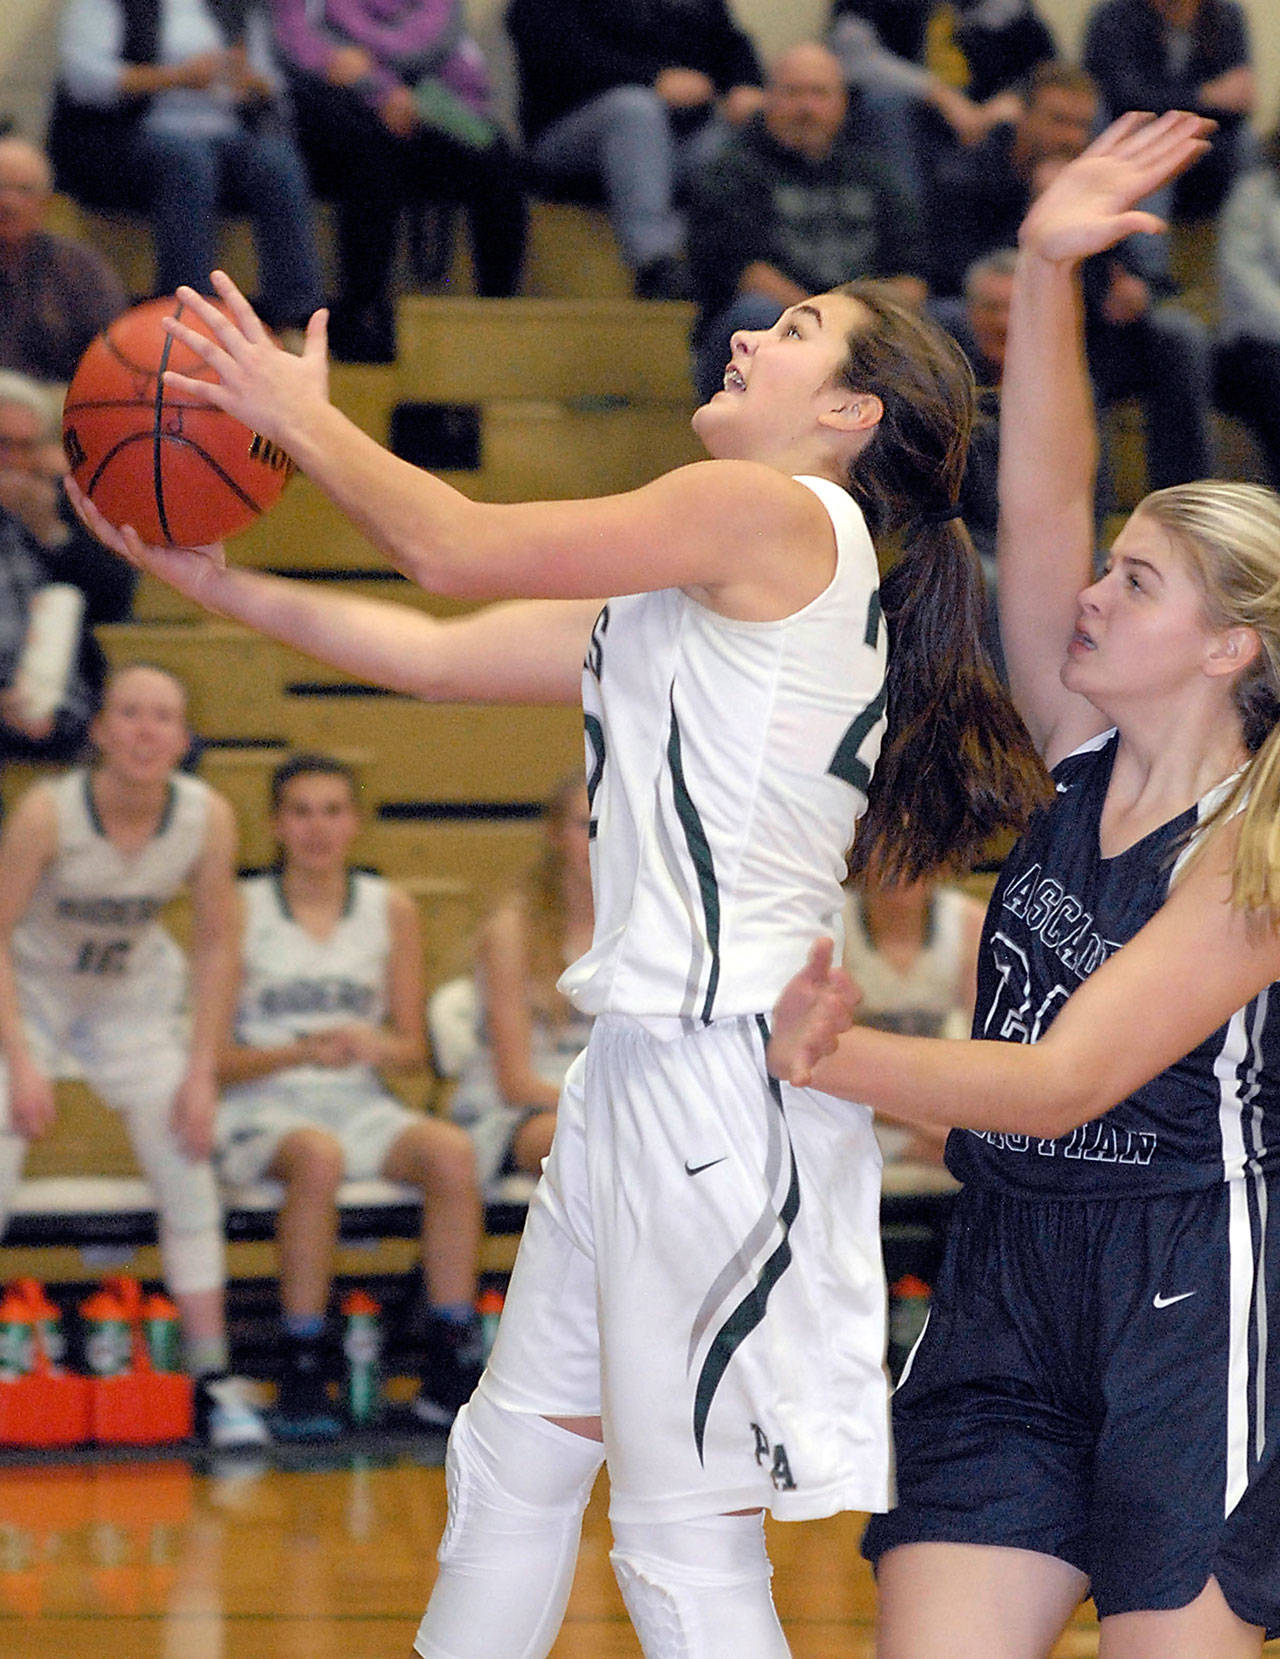 Keith Thorpe/Peninsula Daily News Port Angeles’ Eve Burke, left, goes for a layup while being defended by Cascade Christian’s Lexi Pearson during a game in December.